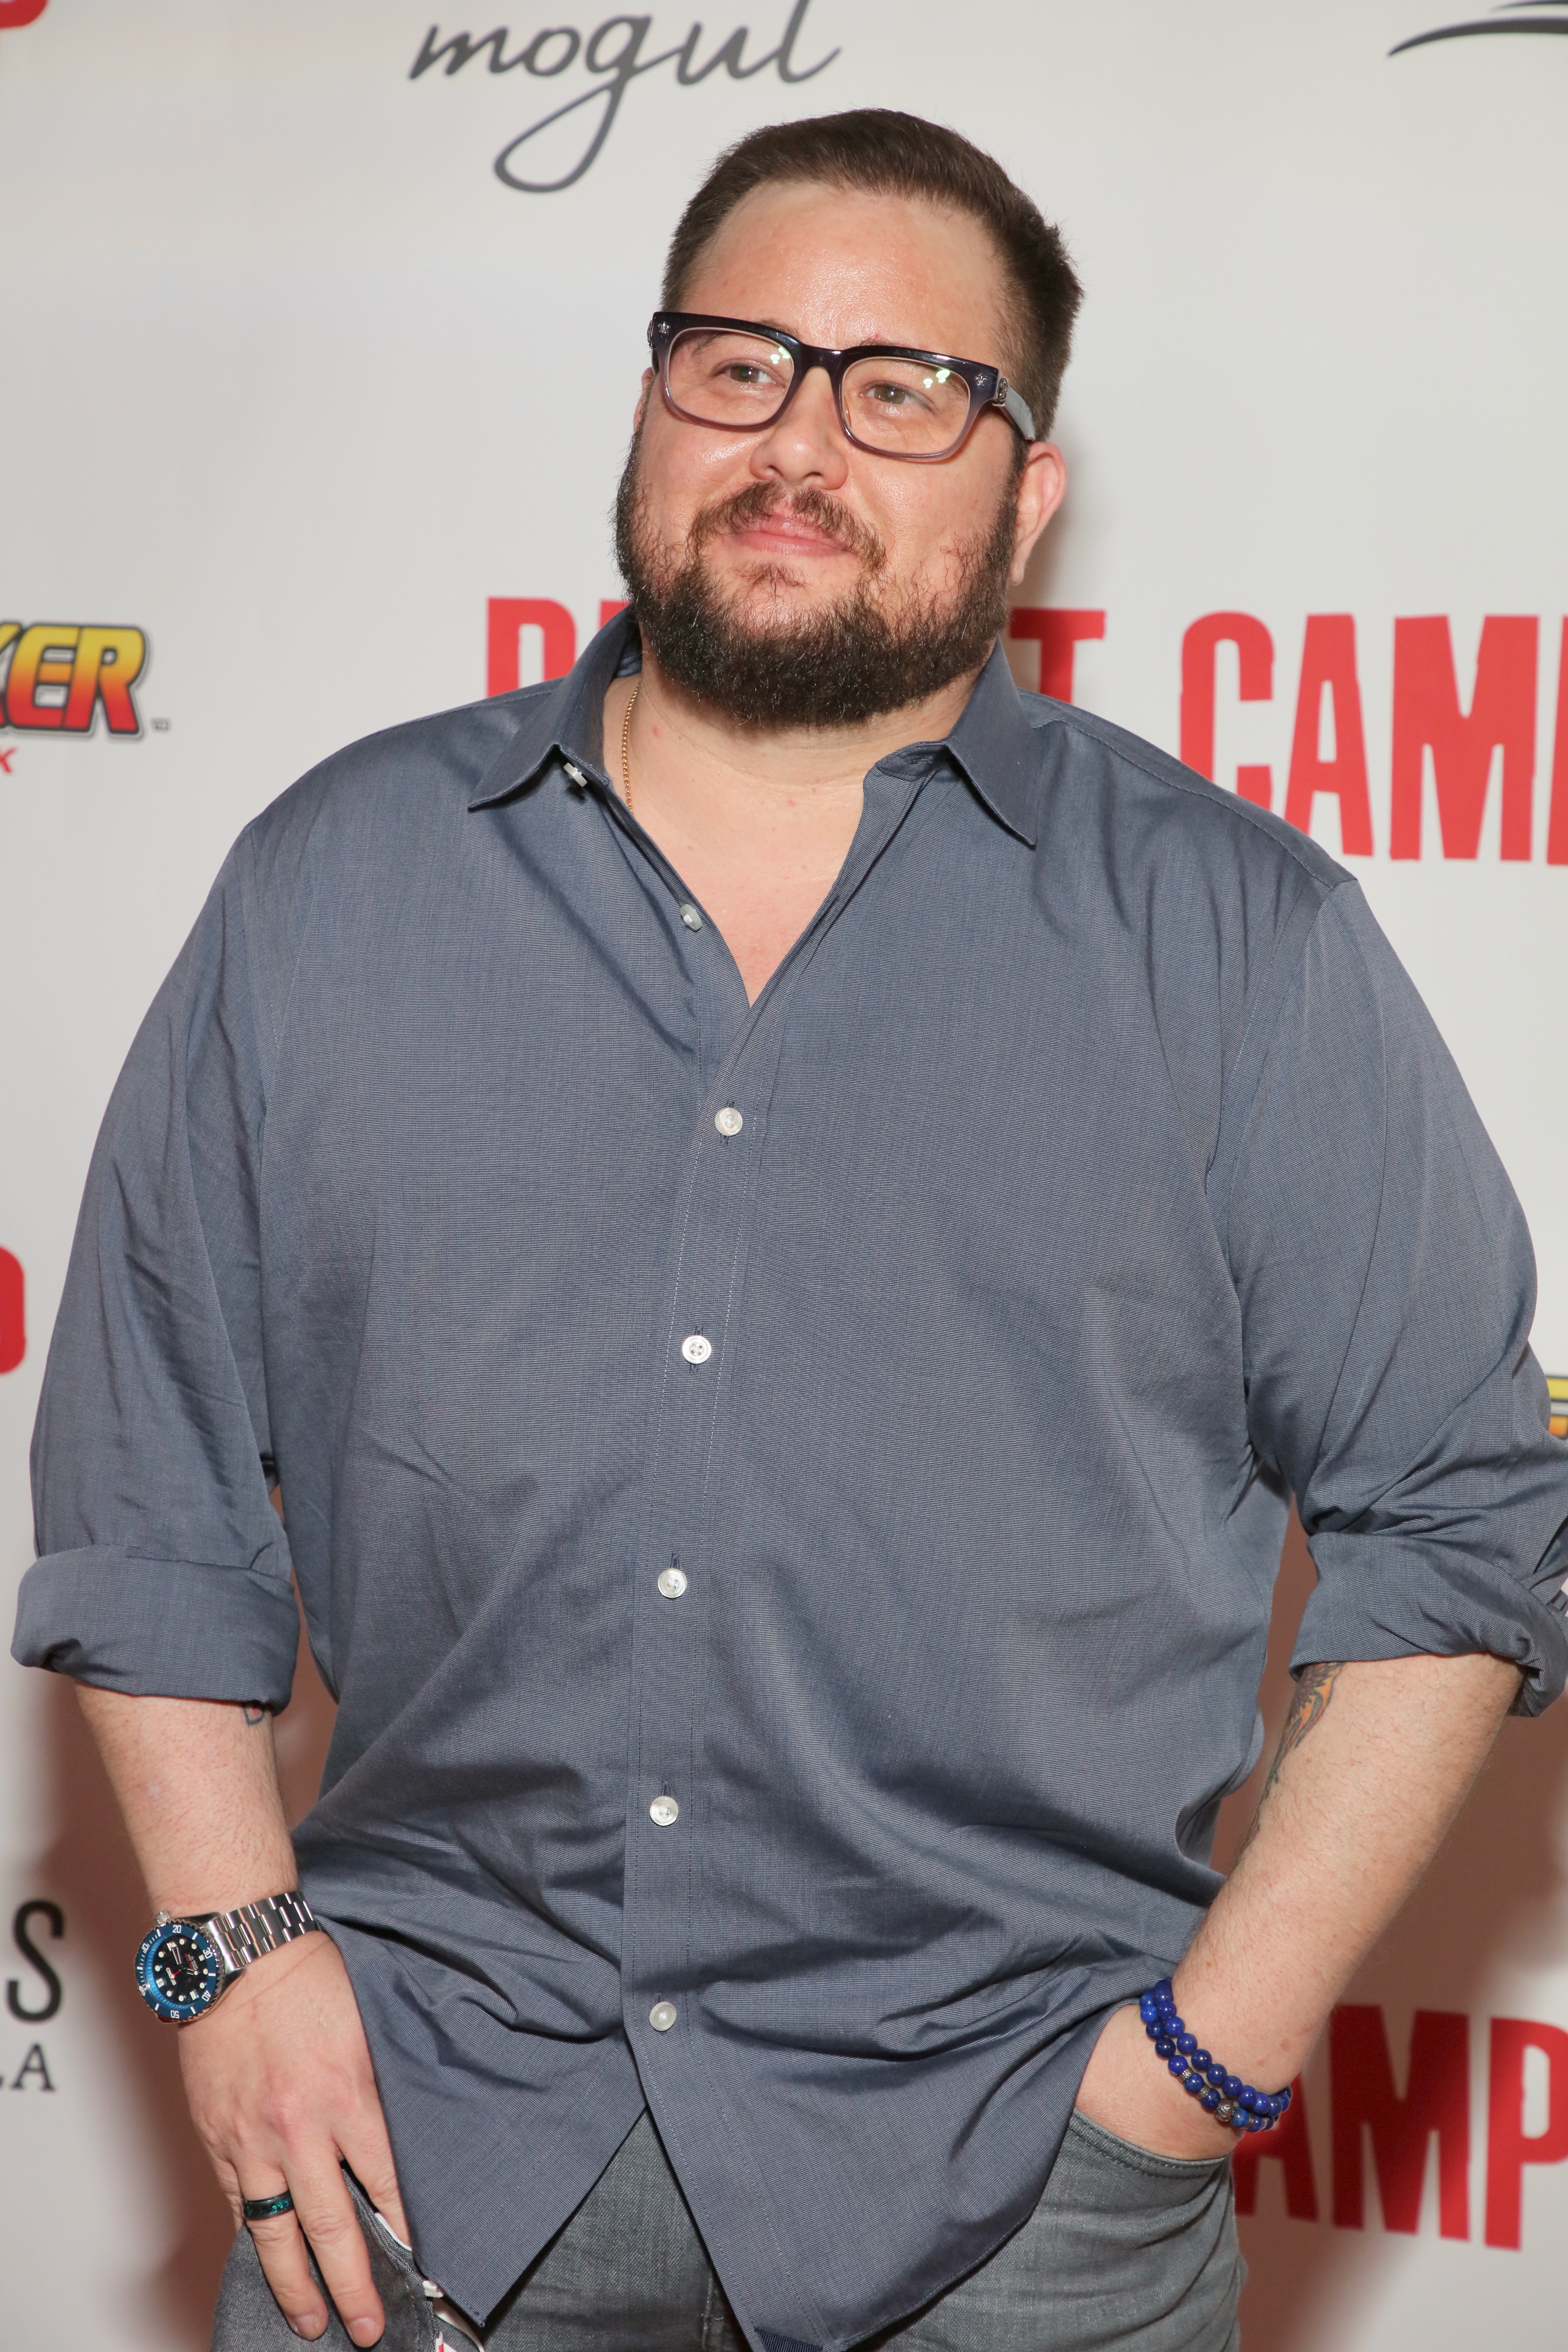 Chaz Bono attends Mogul Productions Screening For "Reboot Camp" in Los Angeles, California, on September 21, 2021. | Source: Getty Images